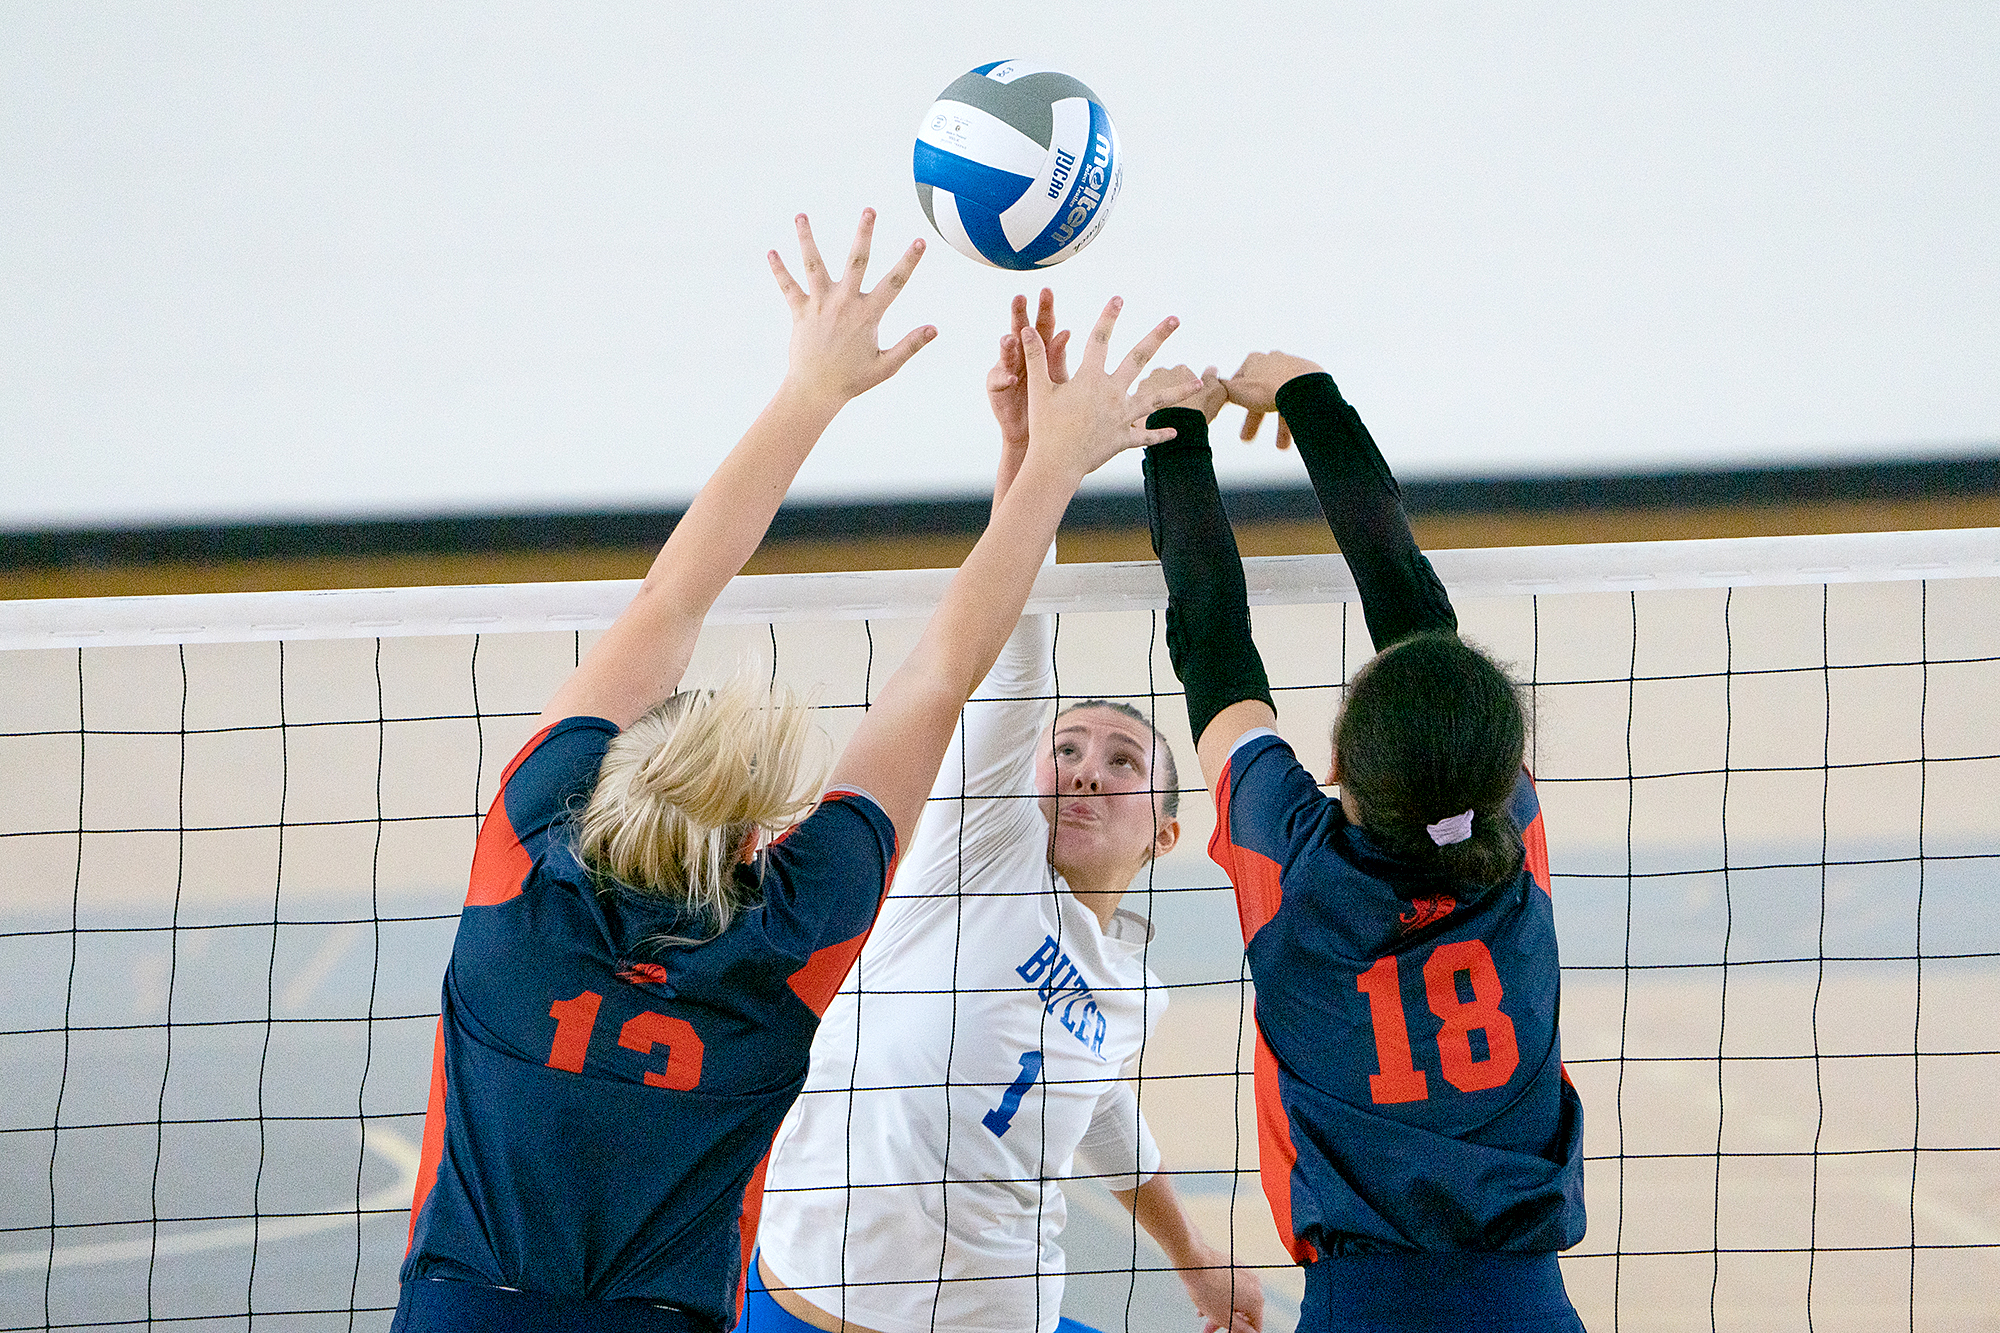 Jozee Weaver, center, a freshman middle hitter on the Butler County Community College volleyball team, reaches for a shot against Greenleigh Gleason, left, and Leah Pimentel, of Caldwell Community College and Technical Institute, during the National Junior College Athletic Association Division III Mid-Atlantic District final Saturday, Oct. 28, 2023, in BC3’s Field House. Caldwell Community College and Technical Institute, Hudson, N.C., defeated the Pioneers in five sets.